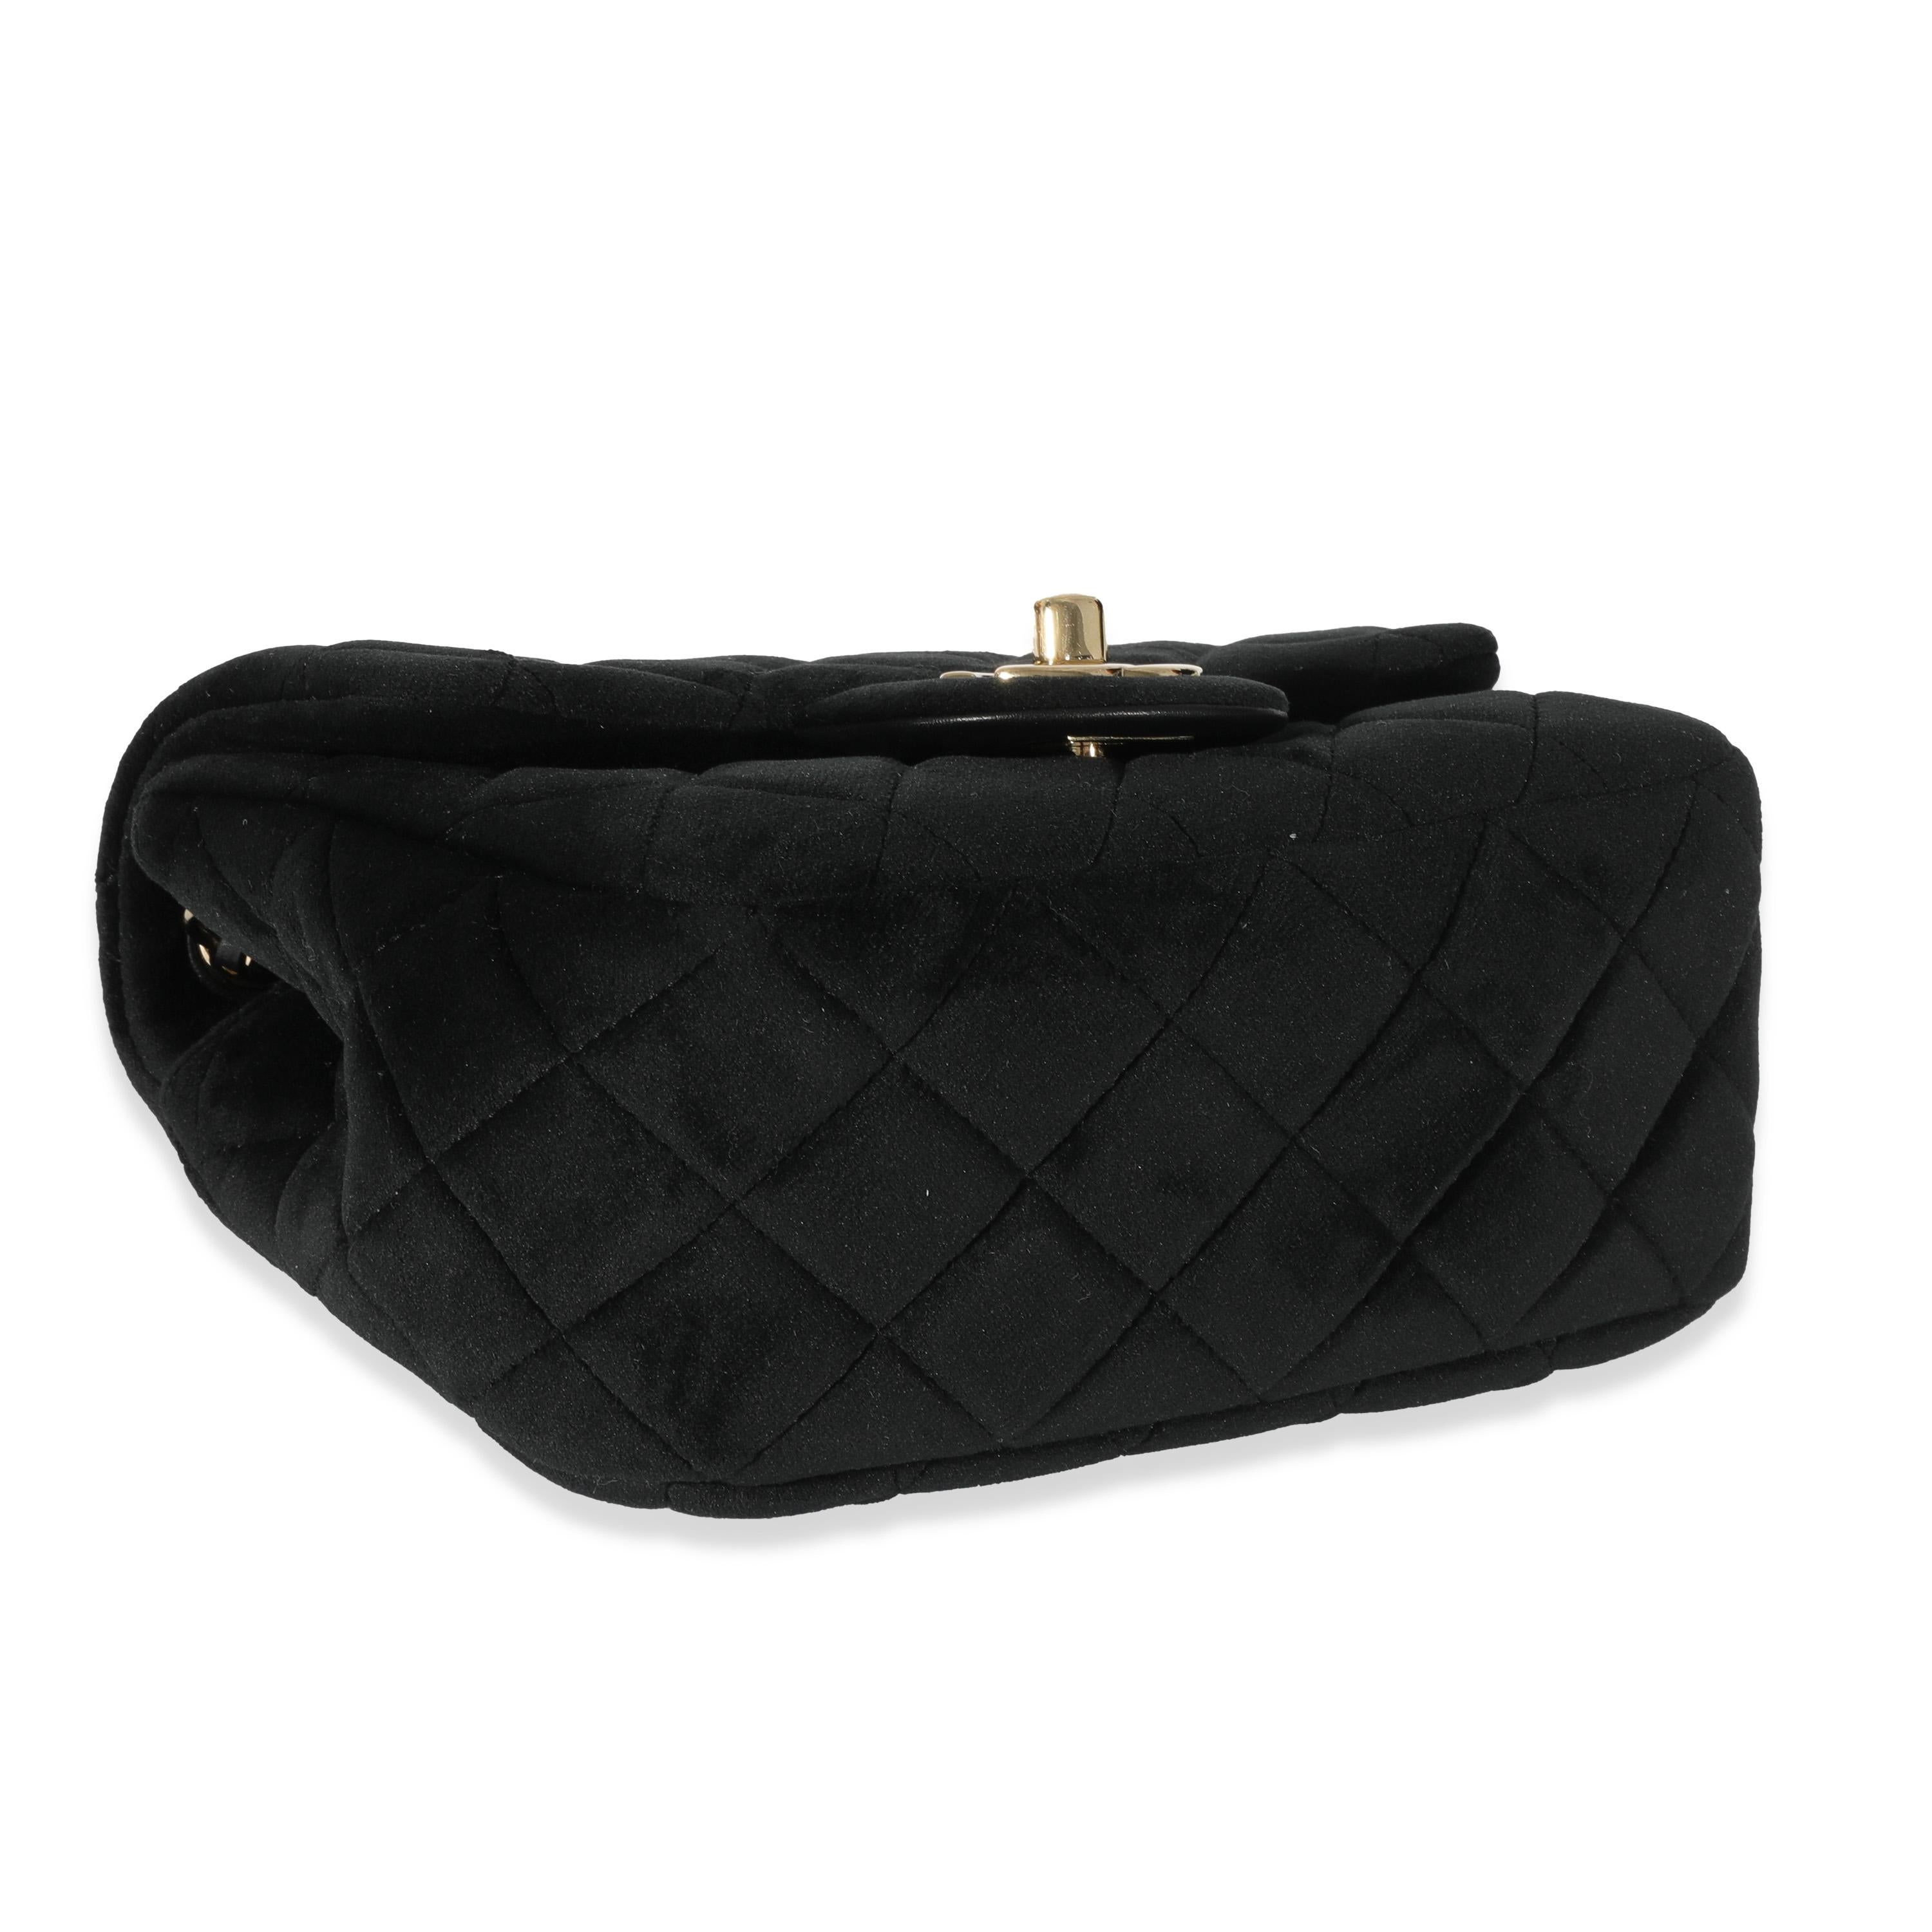 Listing Title: Chanel Black Velvet Pearl Crush Mini Square Flap
 SKU: 128588
 Condition: Pre-owned 
 Condition Description: A timeless classic that never goes out of style, the flap bag from Chanel dates back to 1955 and has seen a number of